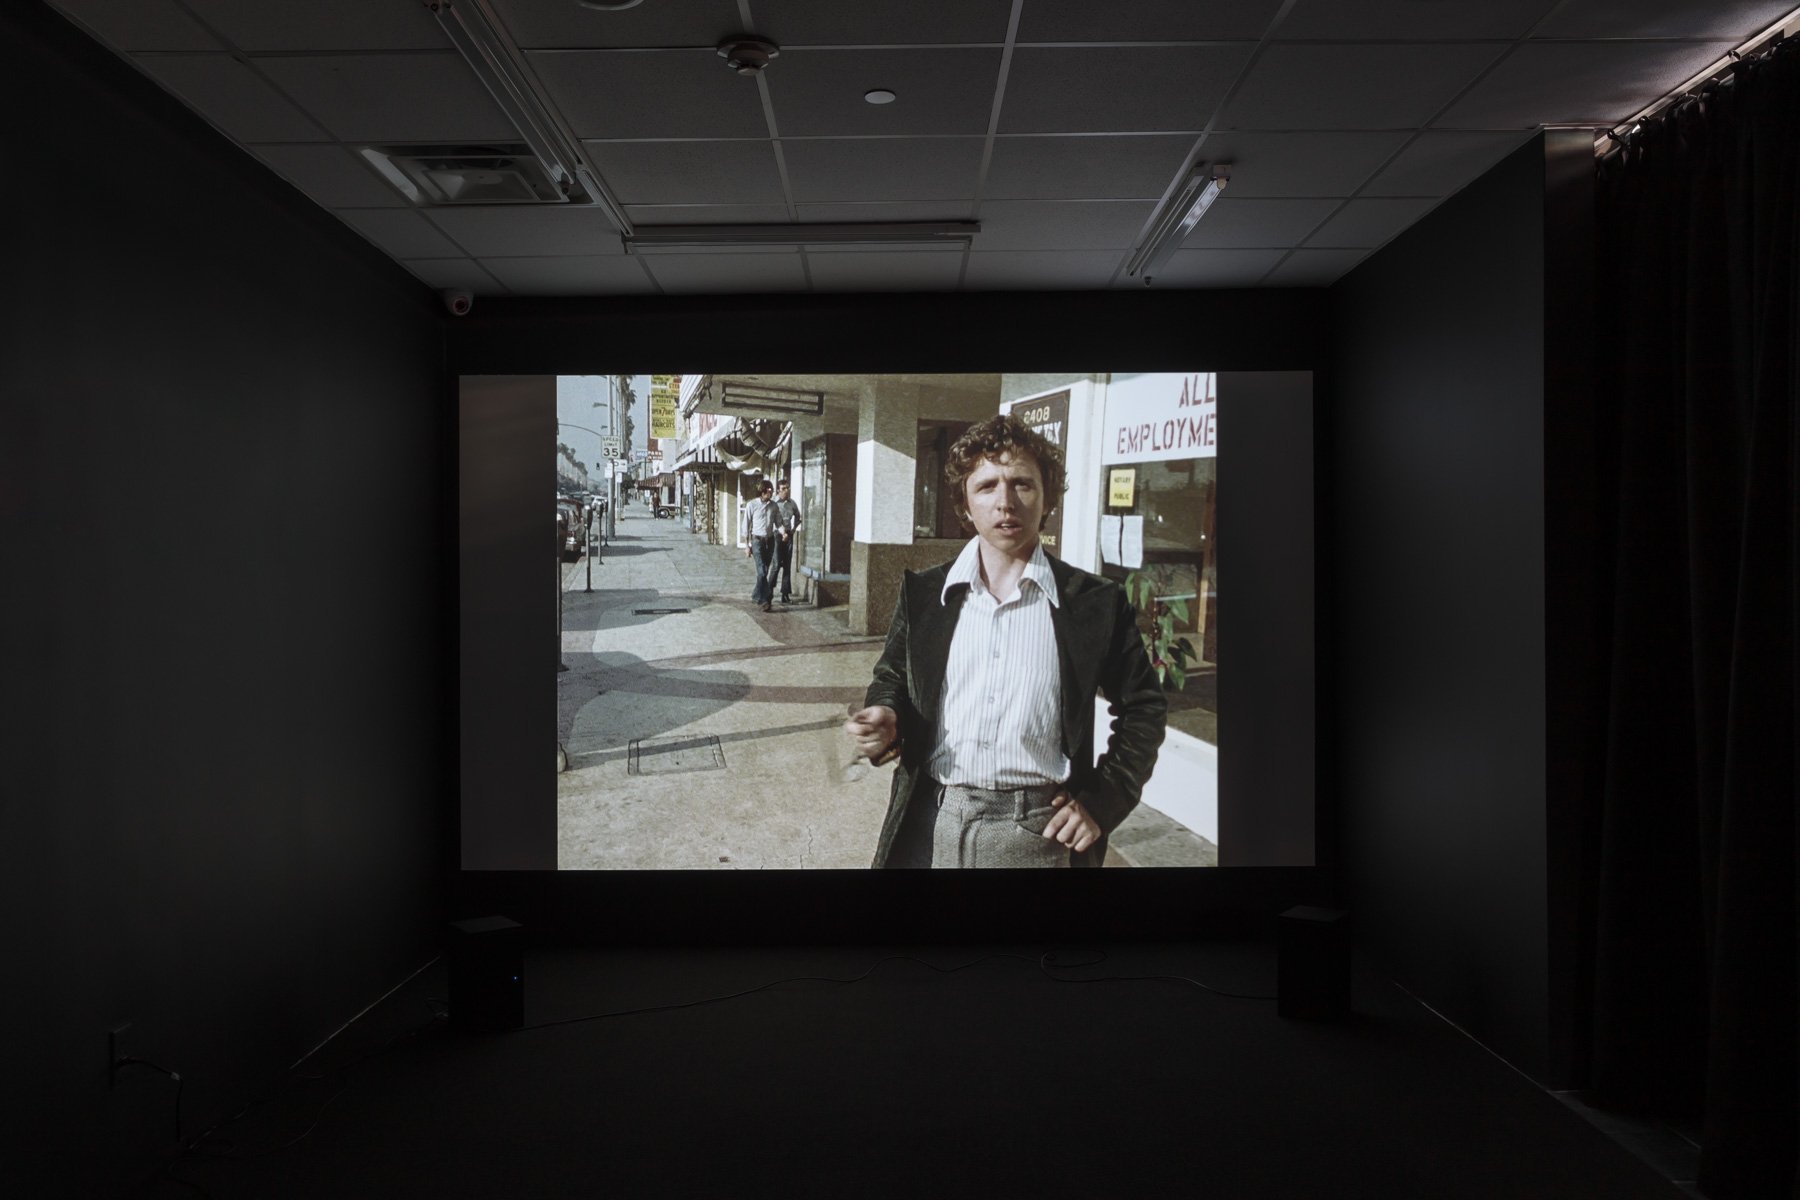  Still from  The Desert People , 1974, installed in  Life as Activity: David Lamelas  at Hunter College Art Galleries’ Leubsdorf Gallery, 2021. Digital video transfer from 16 mm film; 47 minutes, 7 seconds. Courtesy of the artist and LUX, London. Pho